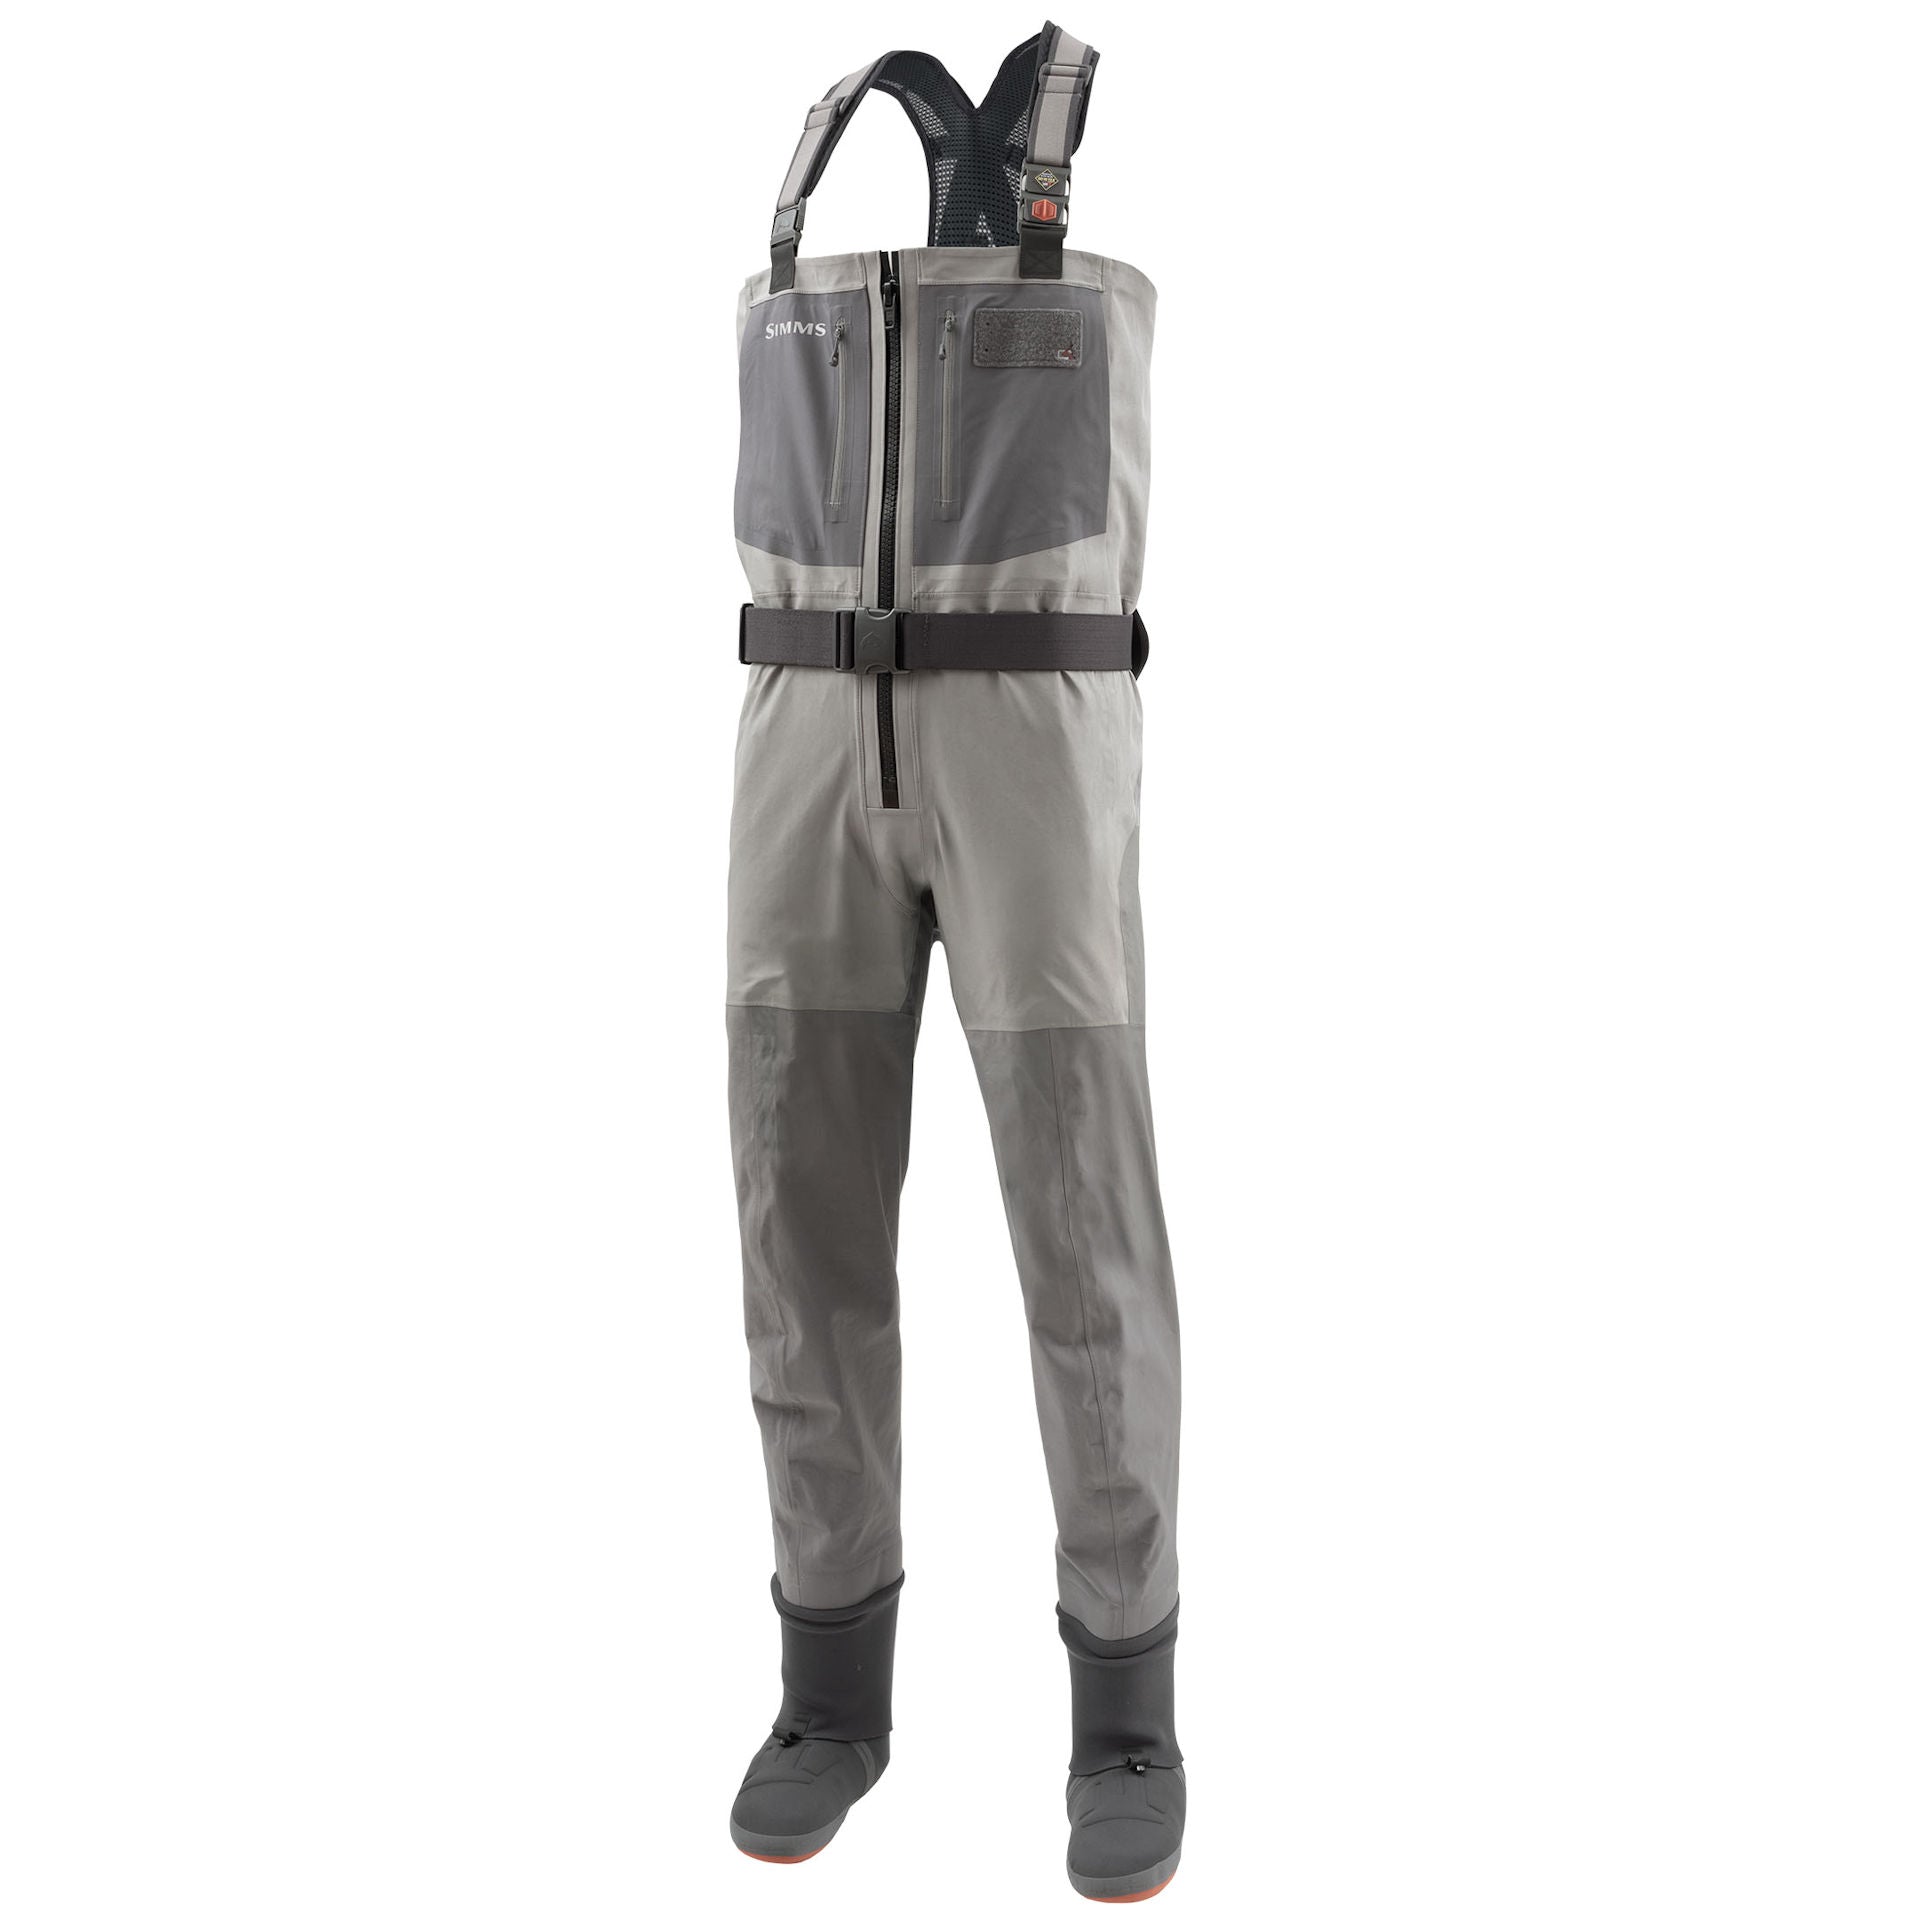 https://cdn.shopify.com/s/files/1/0211/7110/products/simms-g4z-waders.jpg